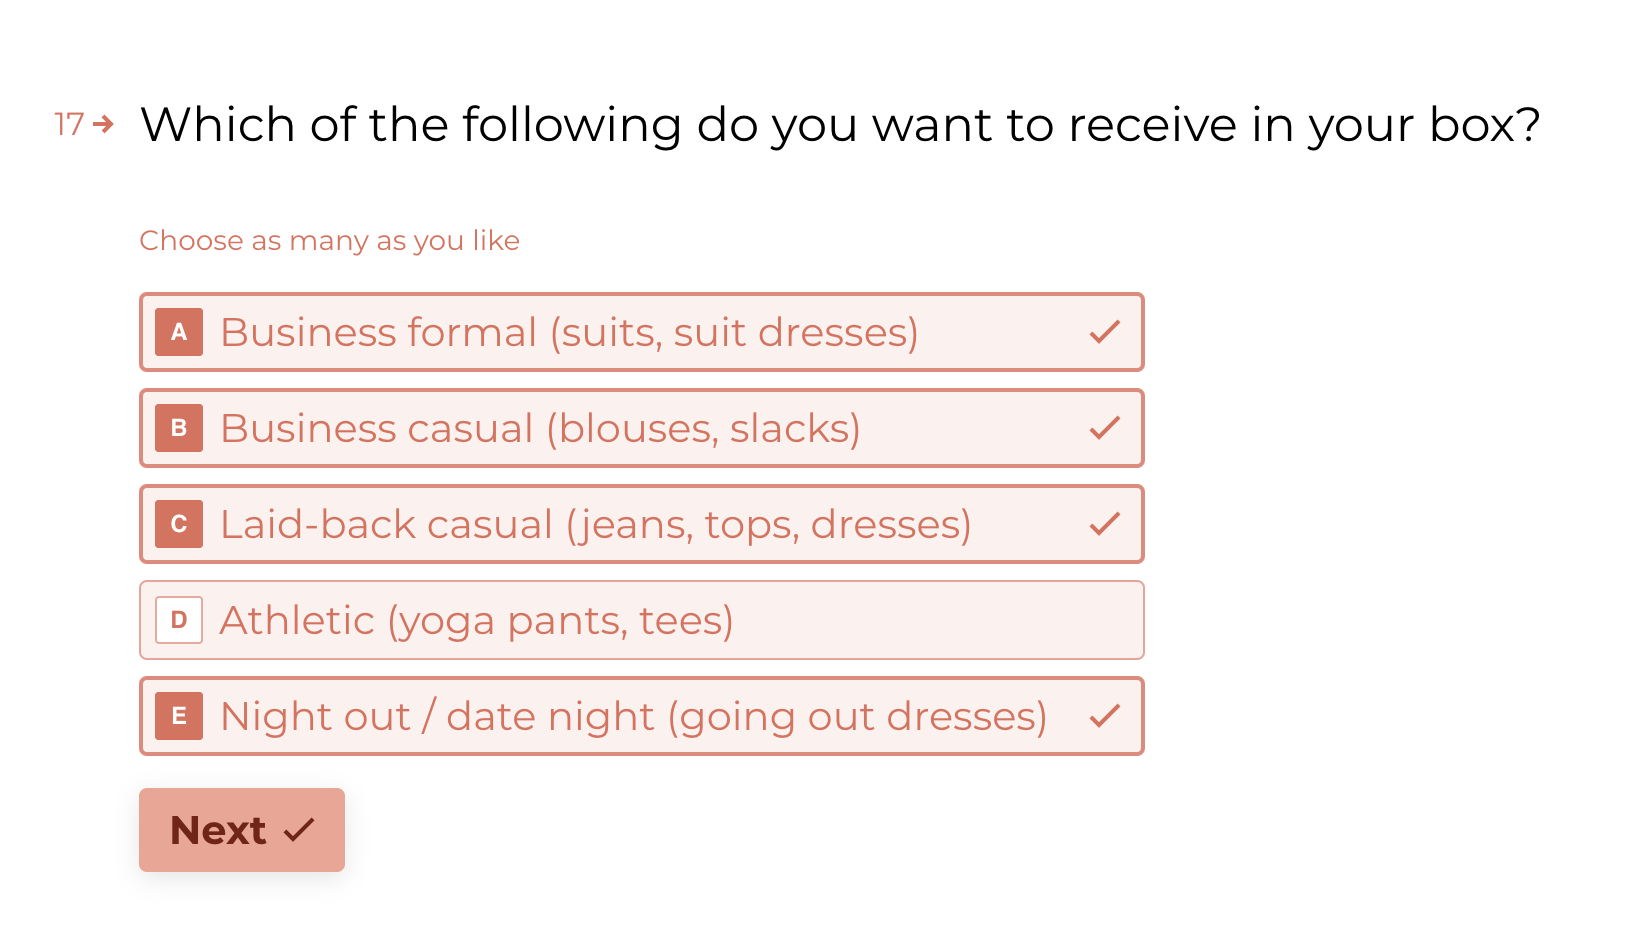 The question &quot;Which of the following do you want to receive in your box?&quot; with several options